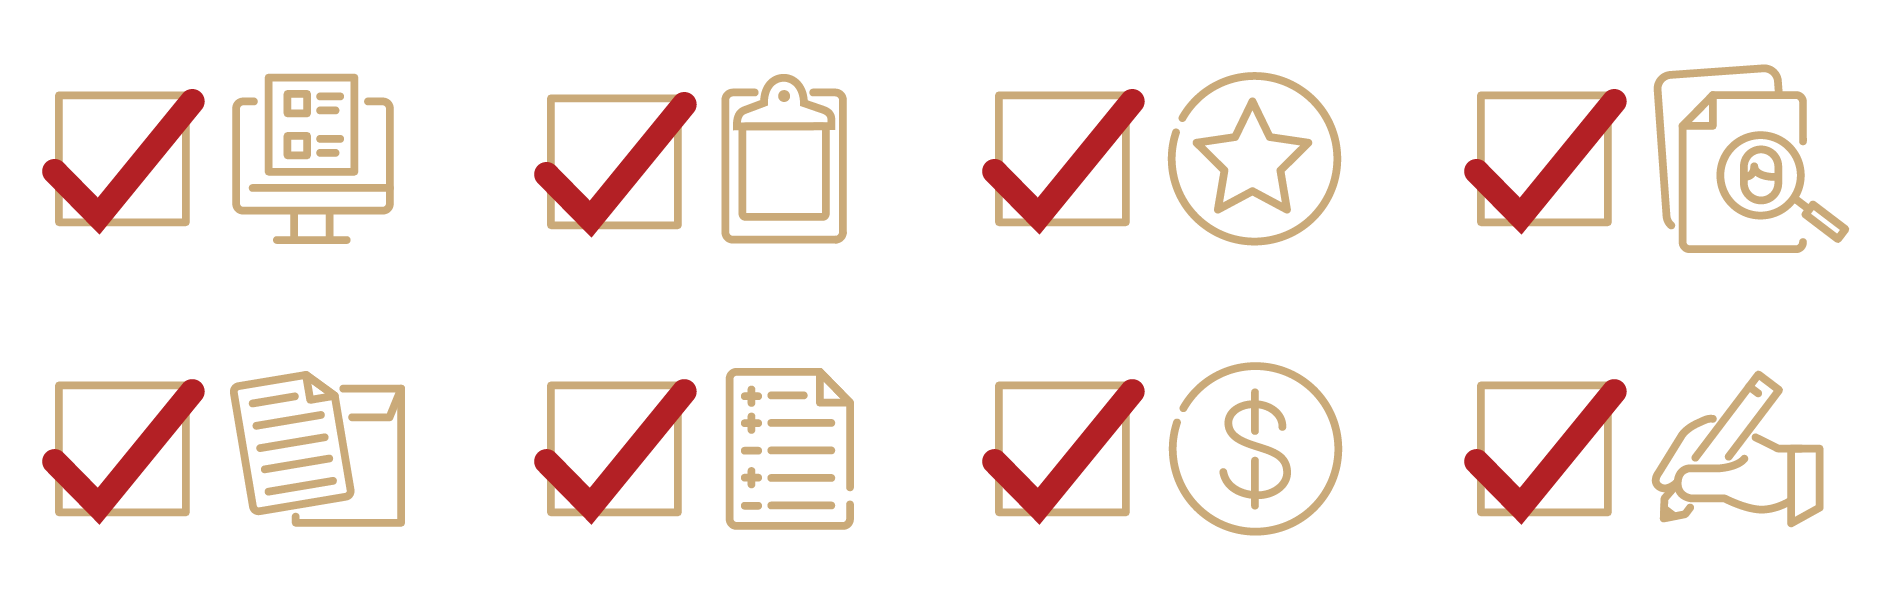 application requirements checklist icons 